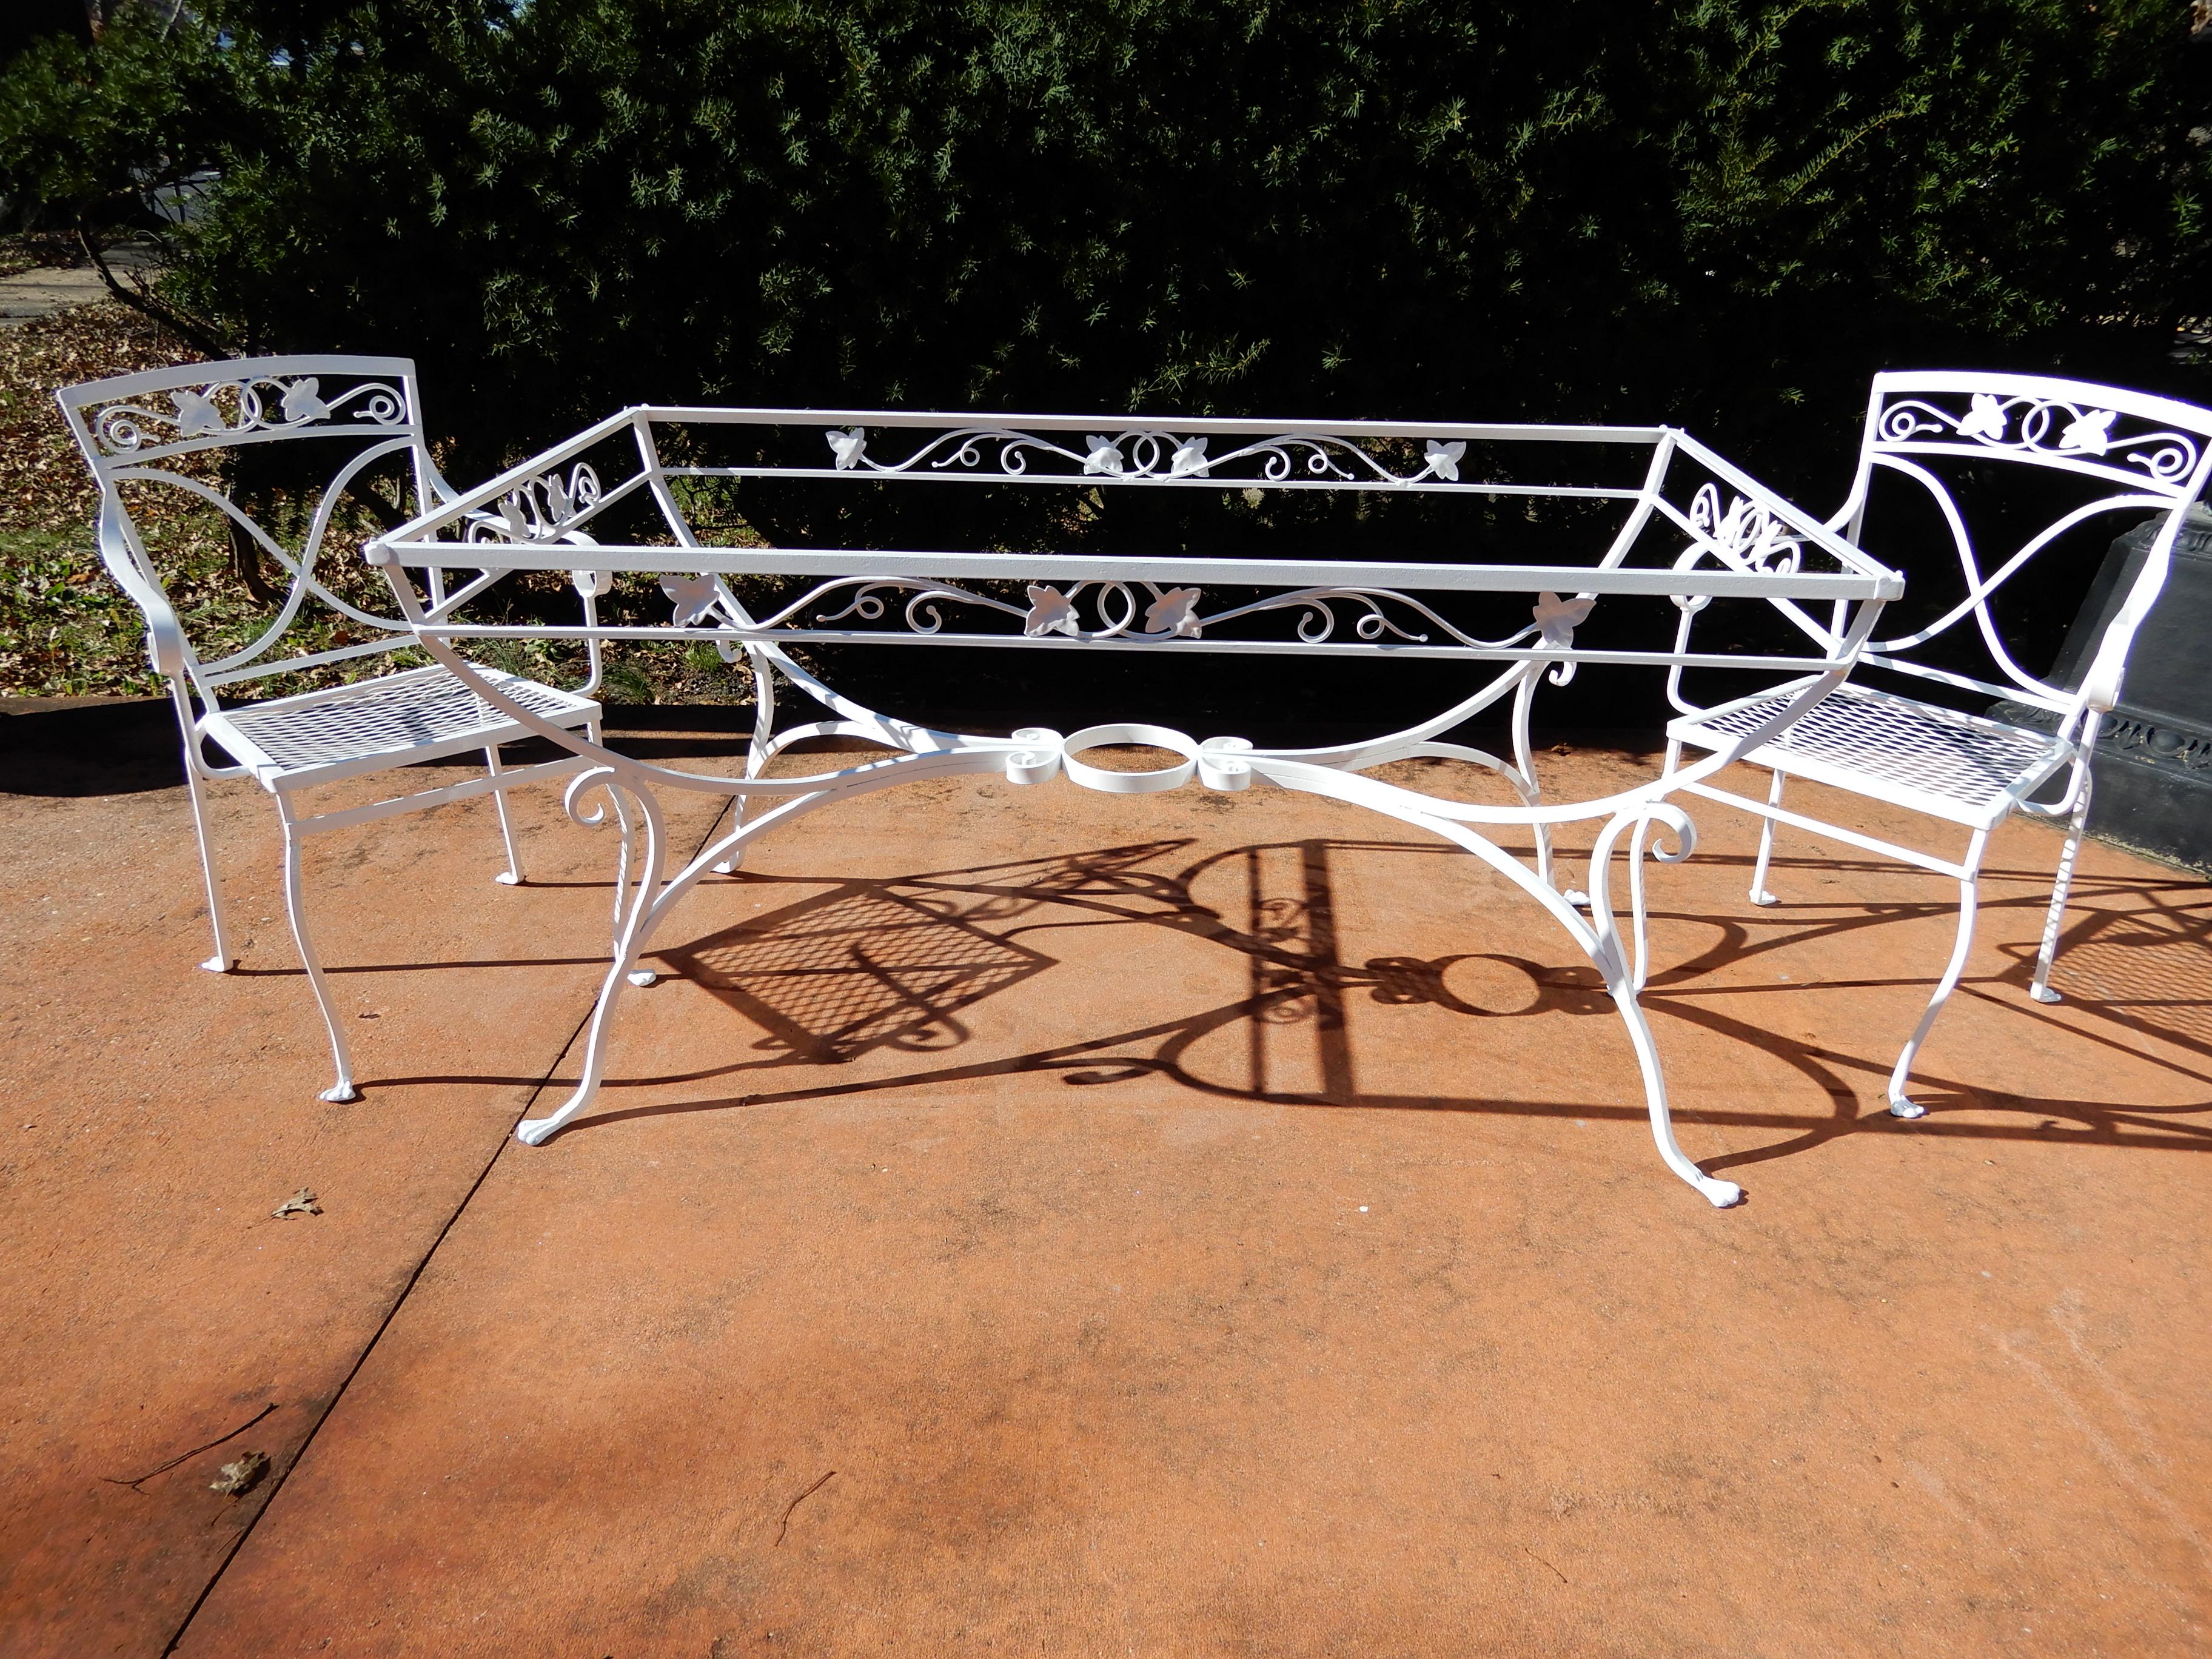 A Salterini vintage midcentury wrought iron 7 piece dining set. The vintage Salterini dining set in the desirable Mt Vernon pattern. The Salterini Dining set has been totally restored and powder coated in a white gloss finish. Many other Salterini